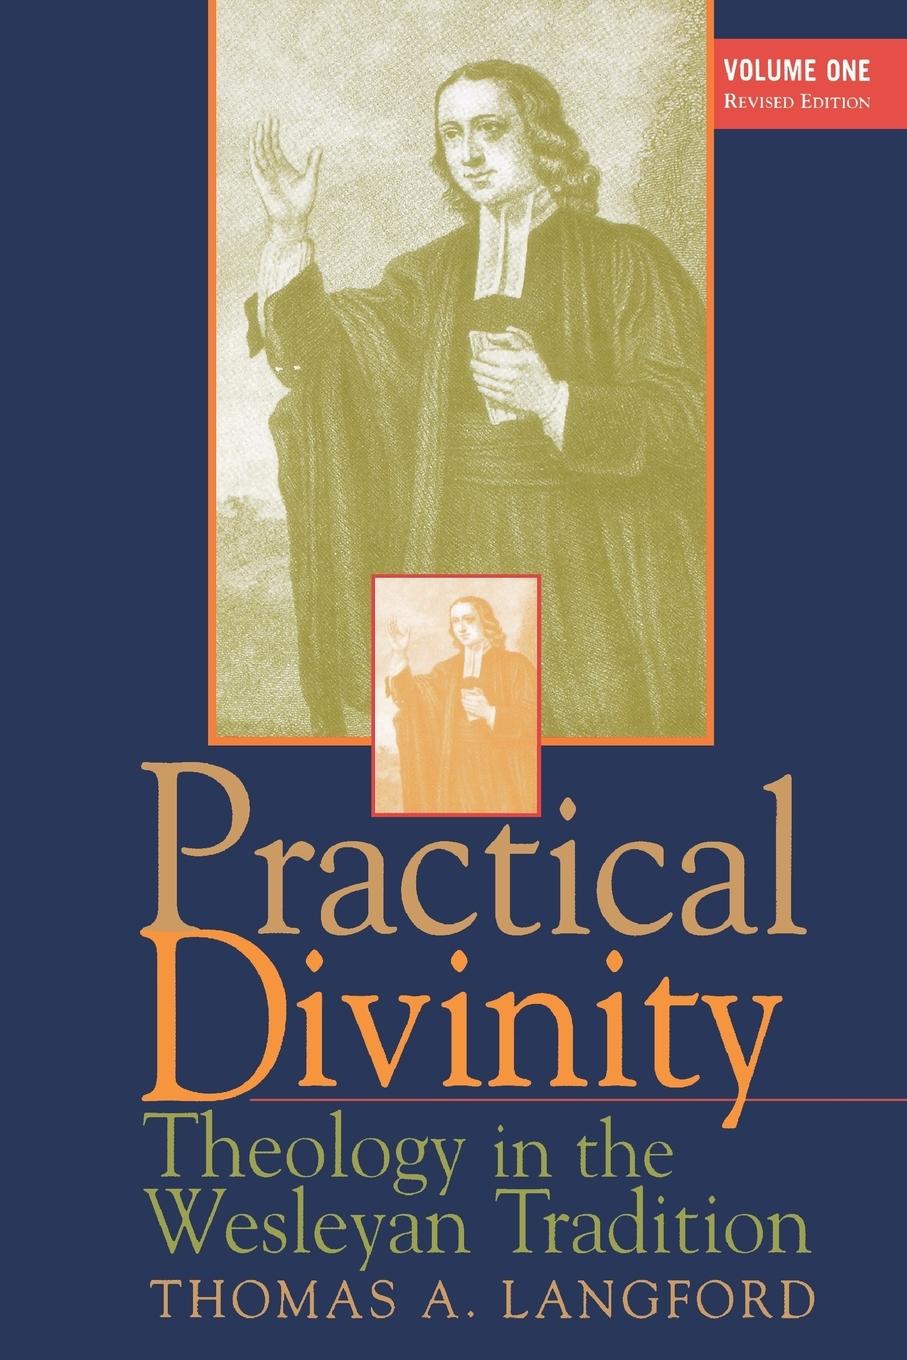 Practical Divinity Volume 1  Theology in the Wesleyan Tradition  Thomas A. Langford  Taschenbuch  Paperback  Englisch  1998  Abingdon Press  EAN 9780687073825 - Langford, Thomas A.